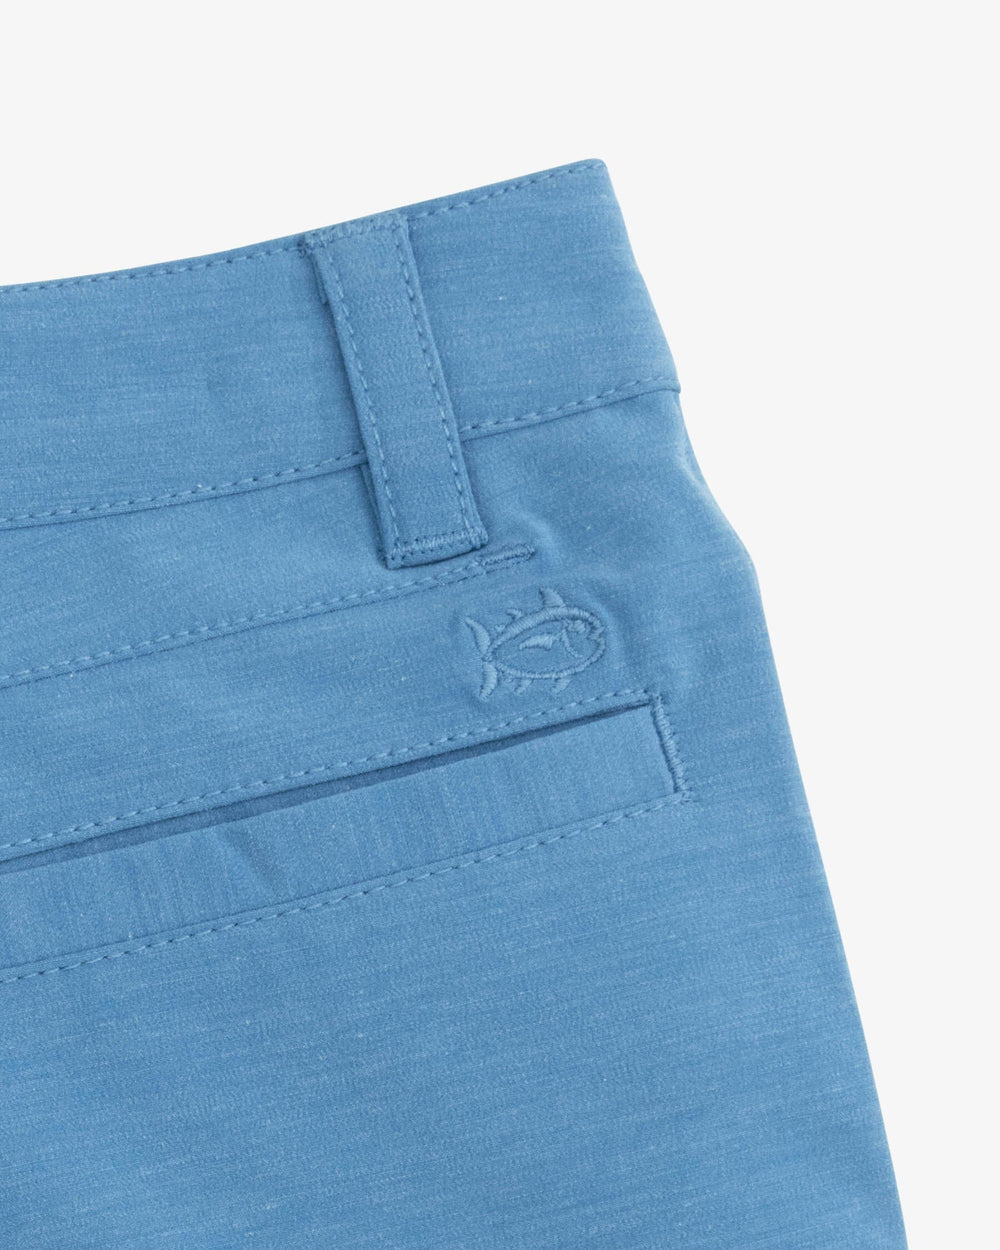 The detail view of the Southern Tide Boys Heathered T3 Gulf Short by Southern Tide - Heather Atlantic Blue